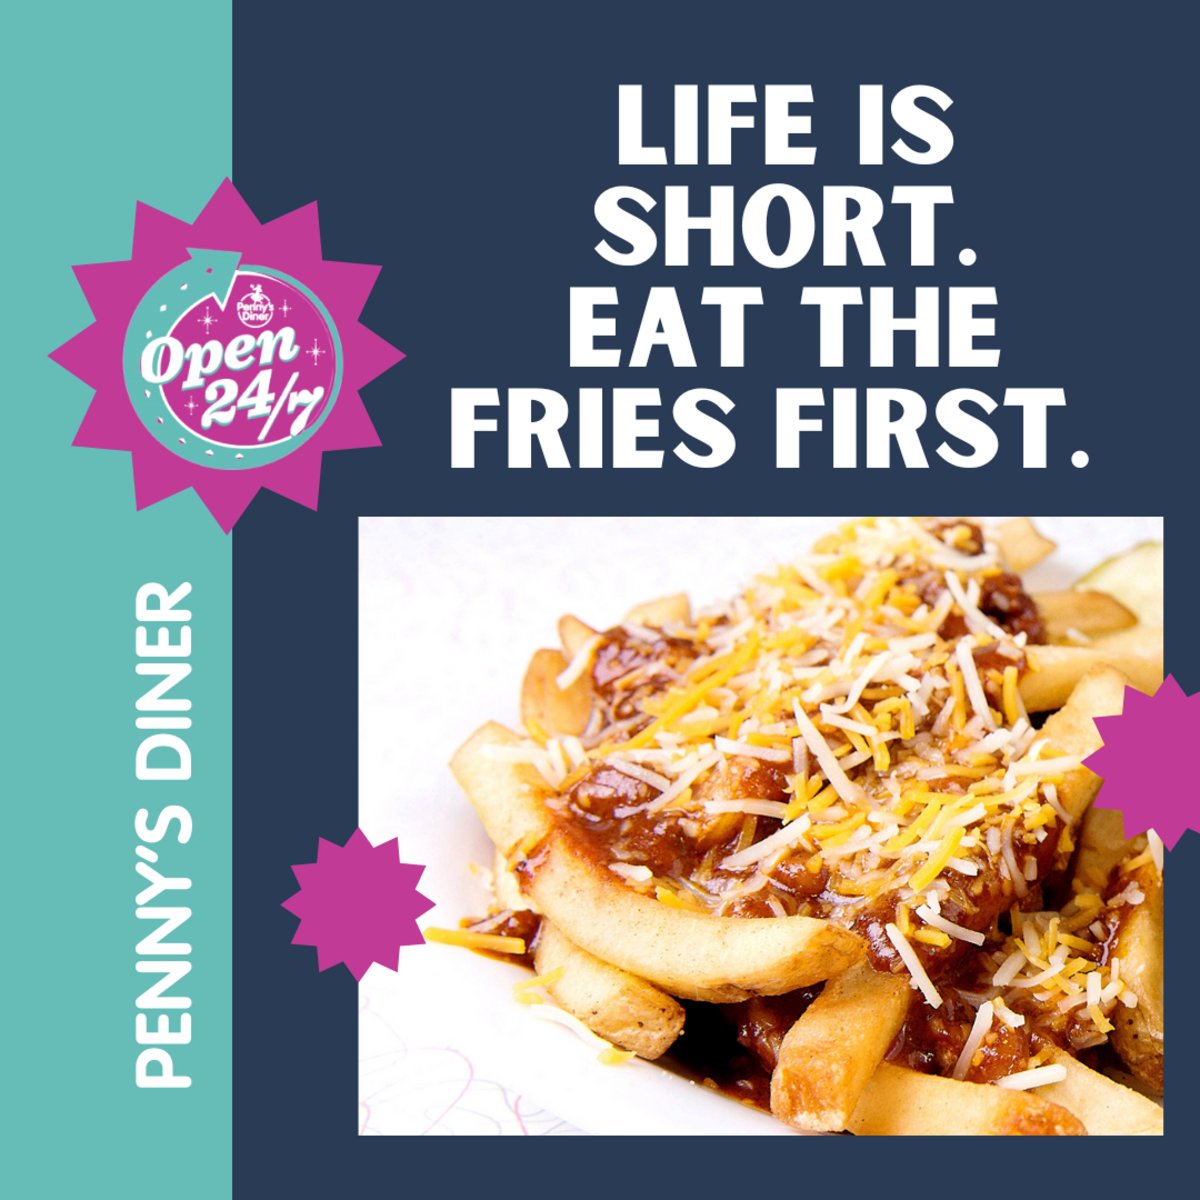 Like we always say at Penny's Diner Fort Scott, chili cheese the day! Stop by and kick off your feast with a basket of our legendary #chilicheesefries. Get 'em while they're hot!🔥🍟 #PennysDiner